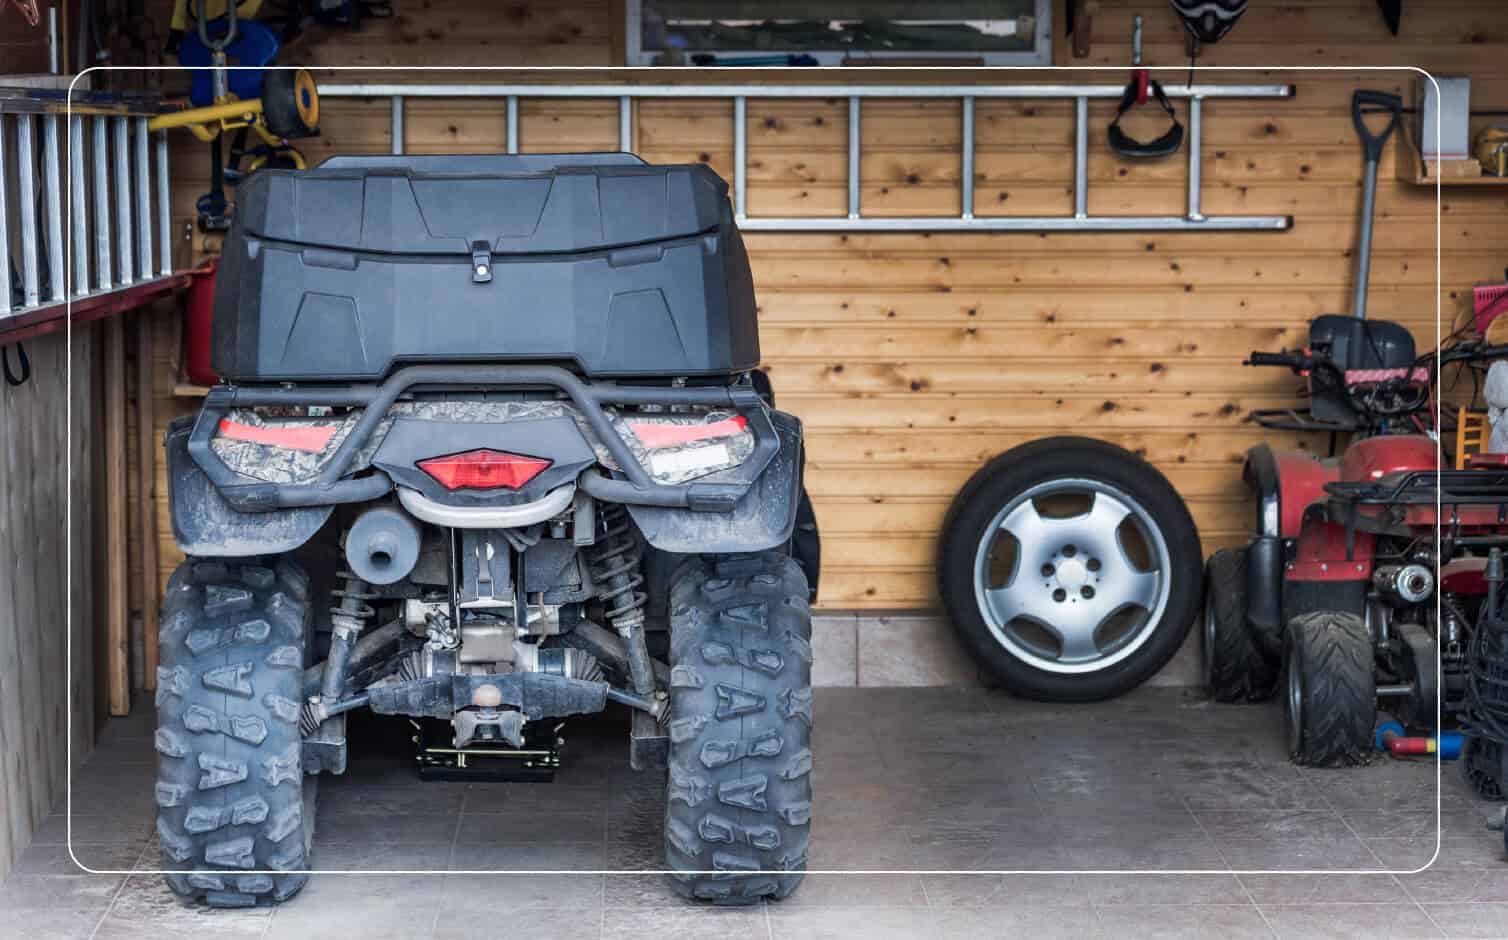 An image of a black ATV in a garage.